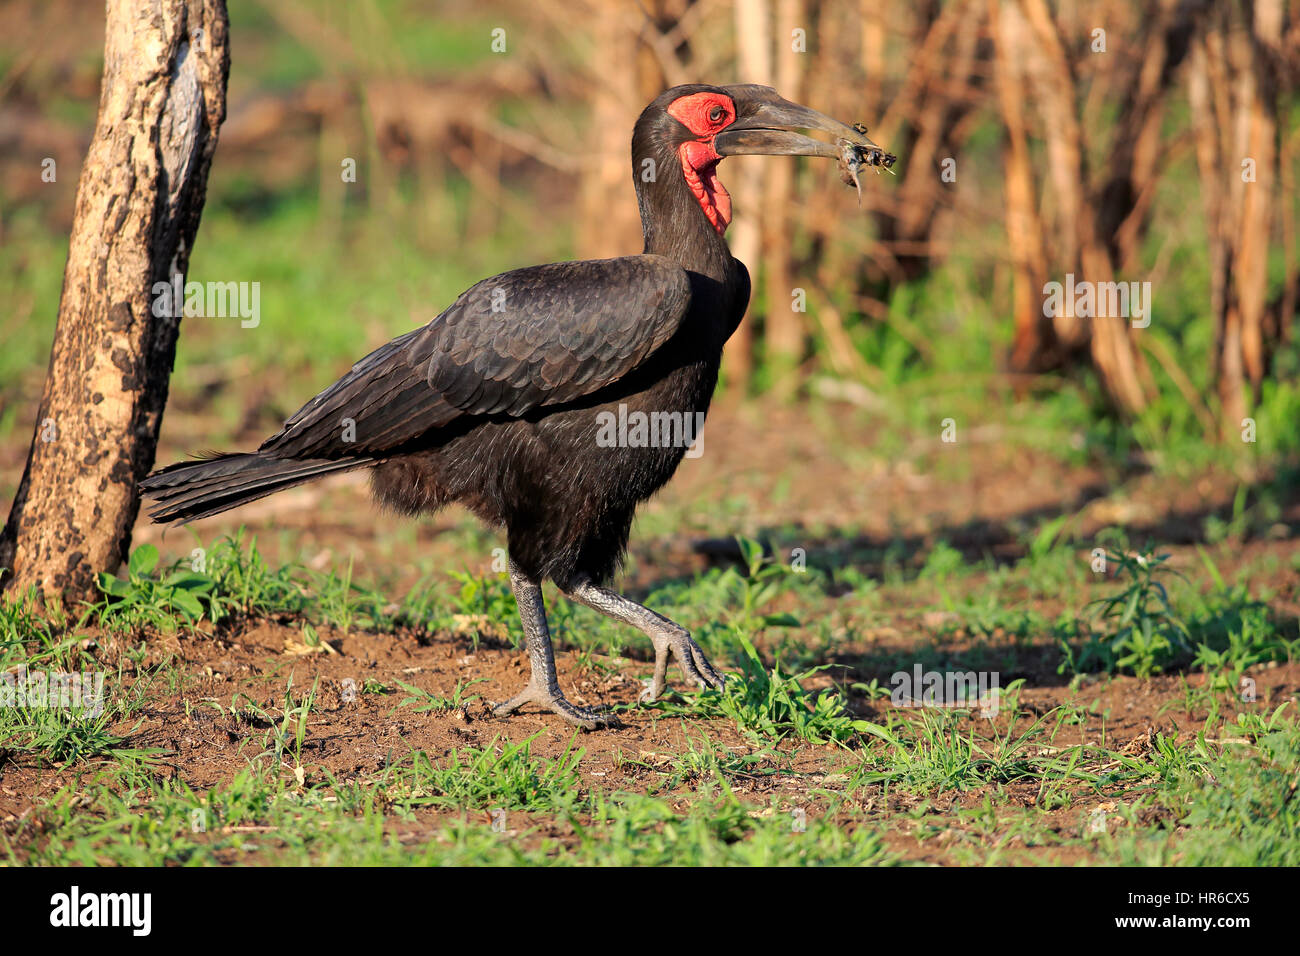 Southern Ground Hornbill, (Bucorvus leadbeateri), adult walking with prey, Kruger Nationalpark, South Africa, Africa Stock Photo